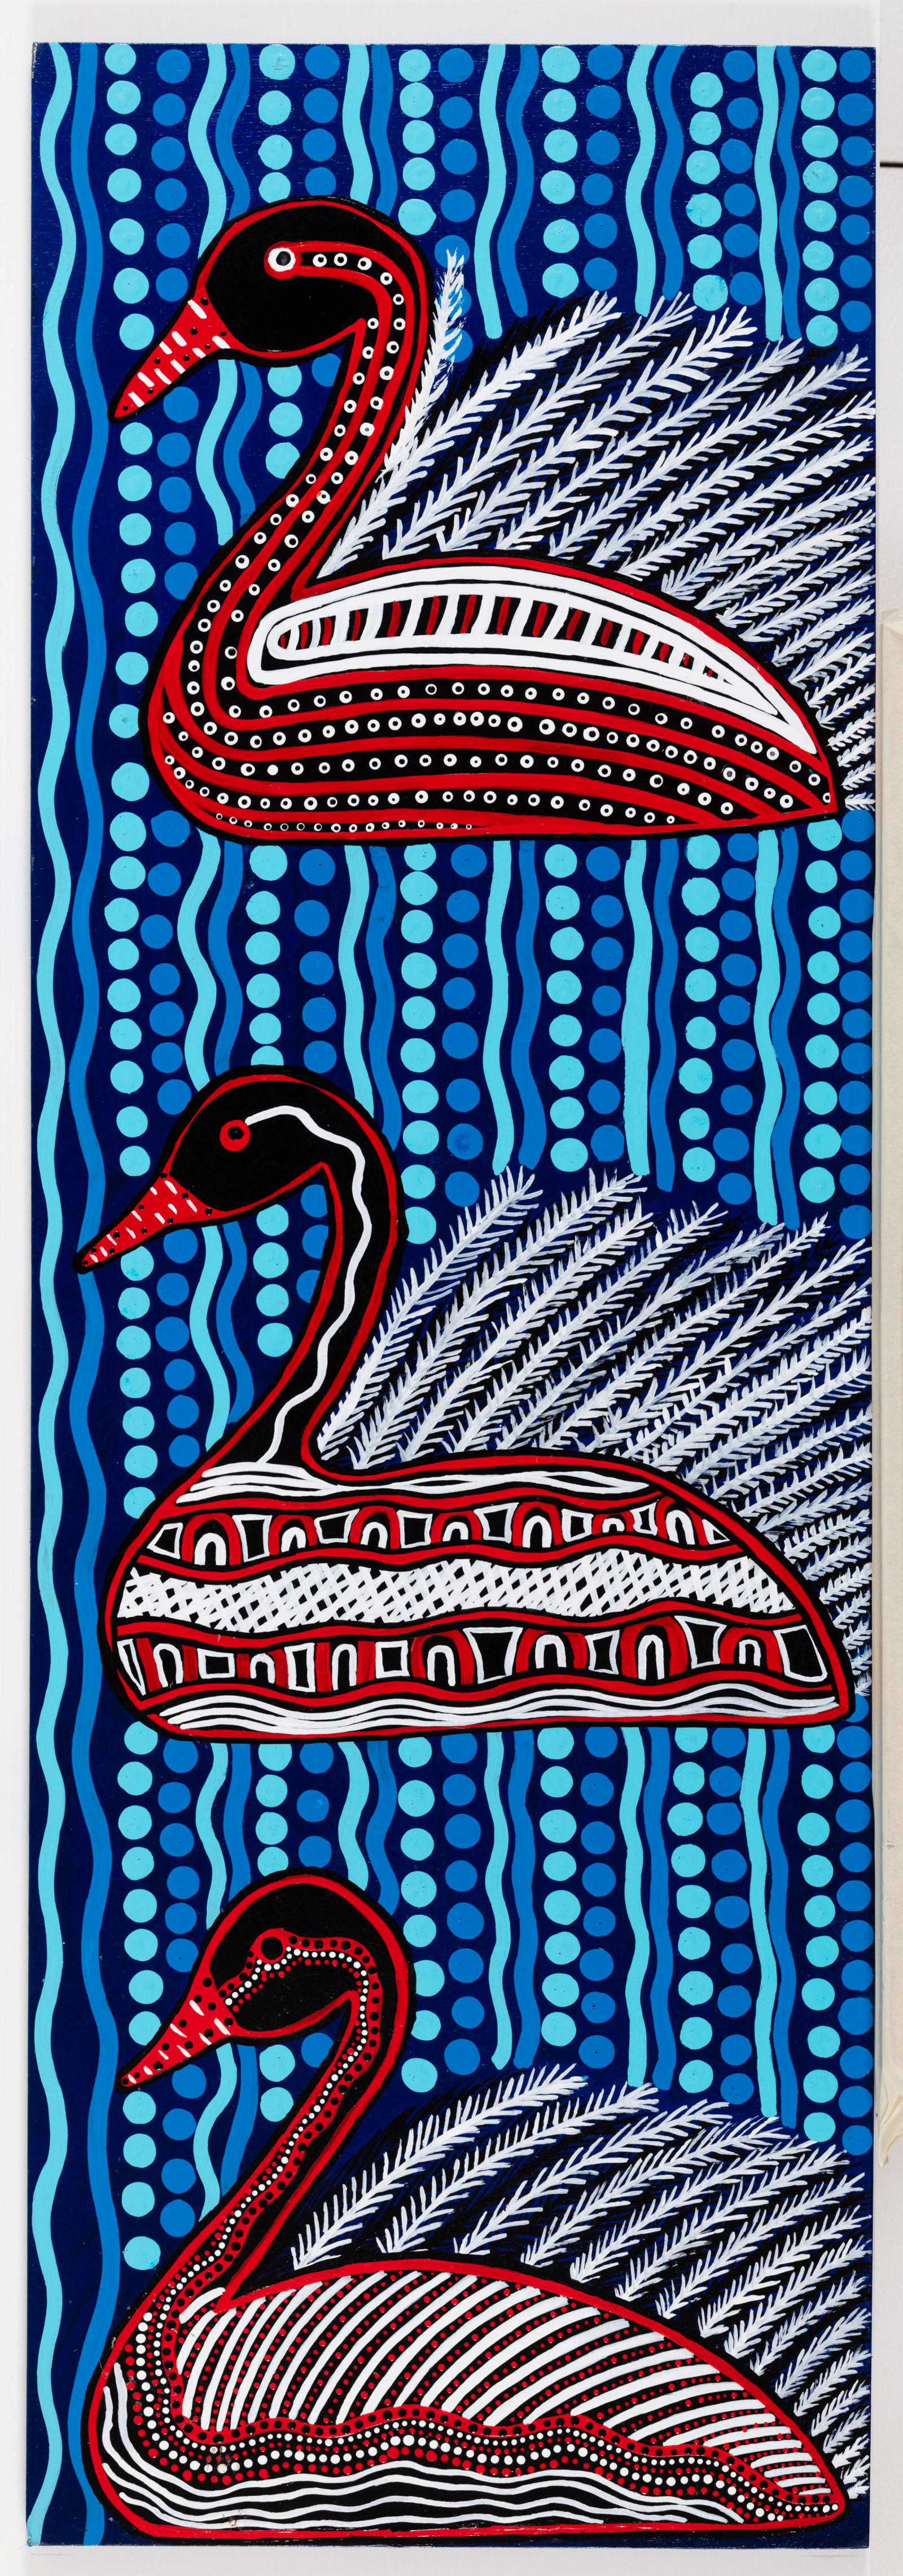 Swans of Coomaditchie Lagoon, Allison Day, 2022, acrylic on plywood board, 122.5cm x 41cm
Beautiful, graceful birds of our Lagoon and Dreaming.